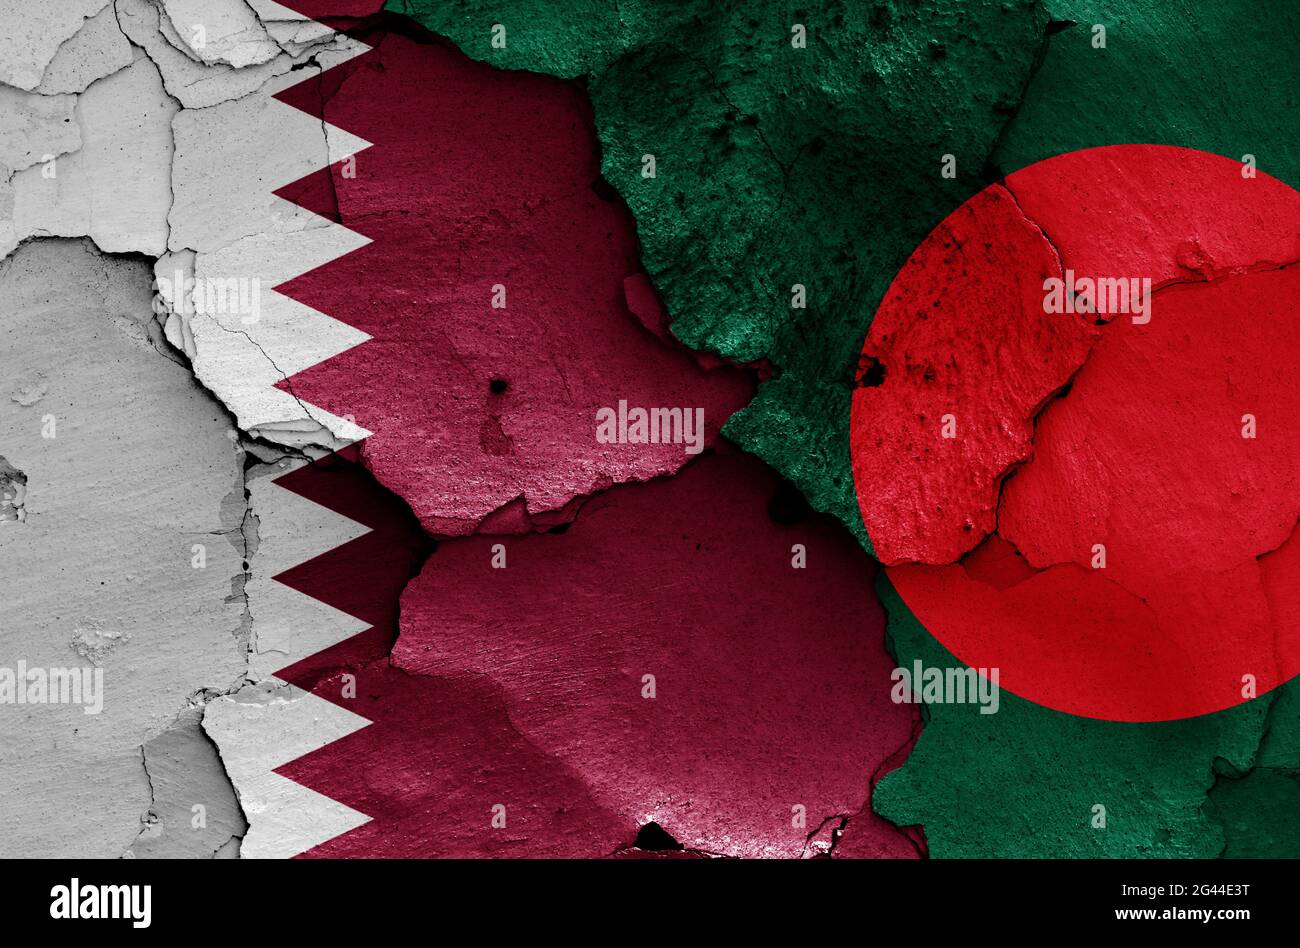 Flags of Qatar and Bangladesh painted on cracked wall Stock Photo